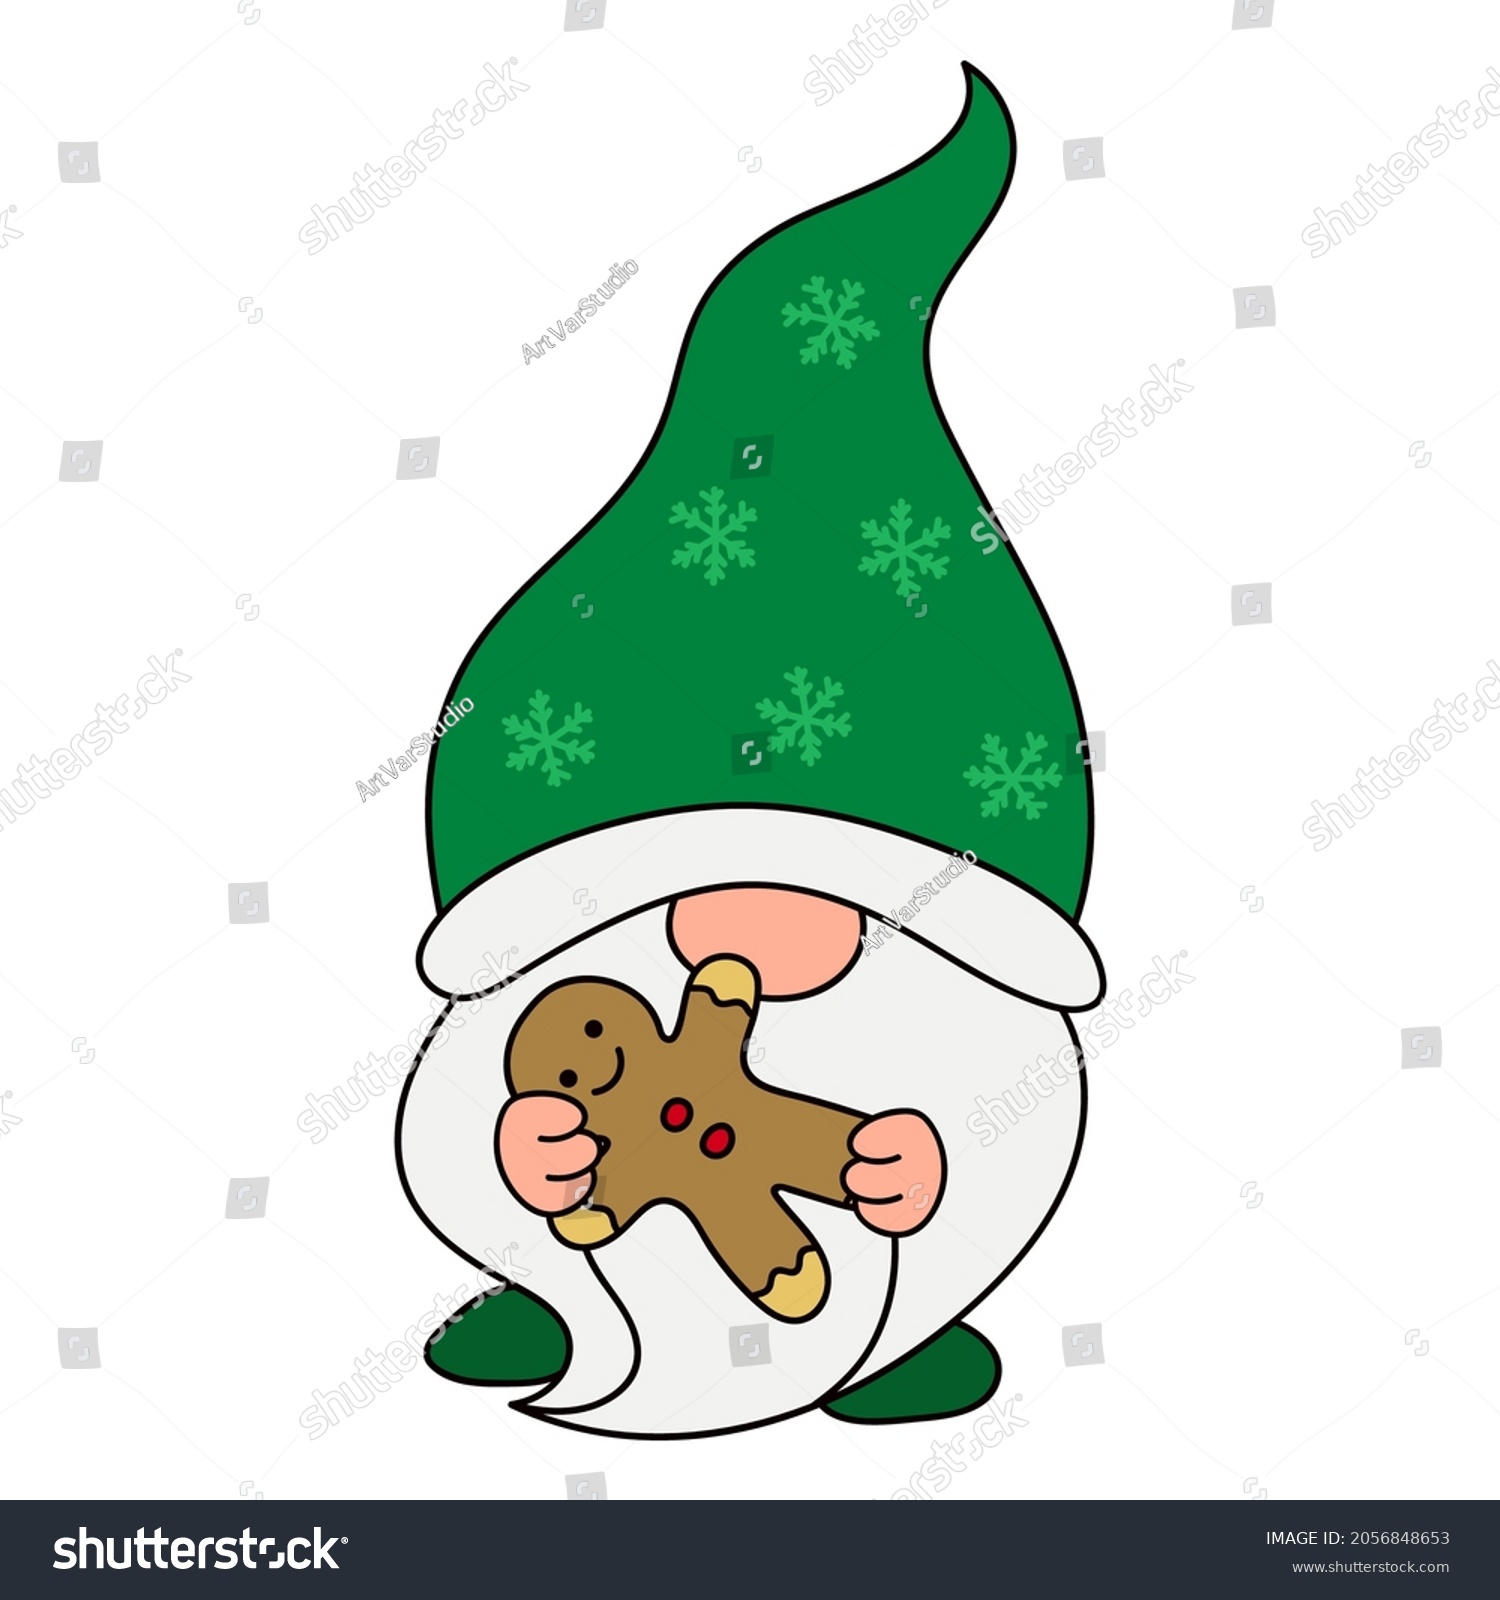 SVG of Christmas gnome clipart. Vector Christmas character illustration. Cartoon clipart Xmas gnome set for kids activity t shirt print, icon, logo, label, patch or sticker. svg